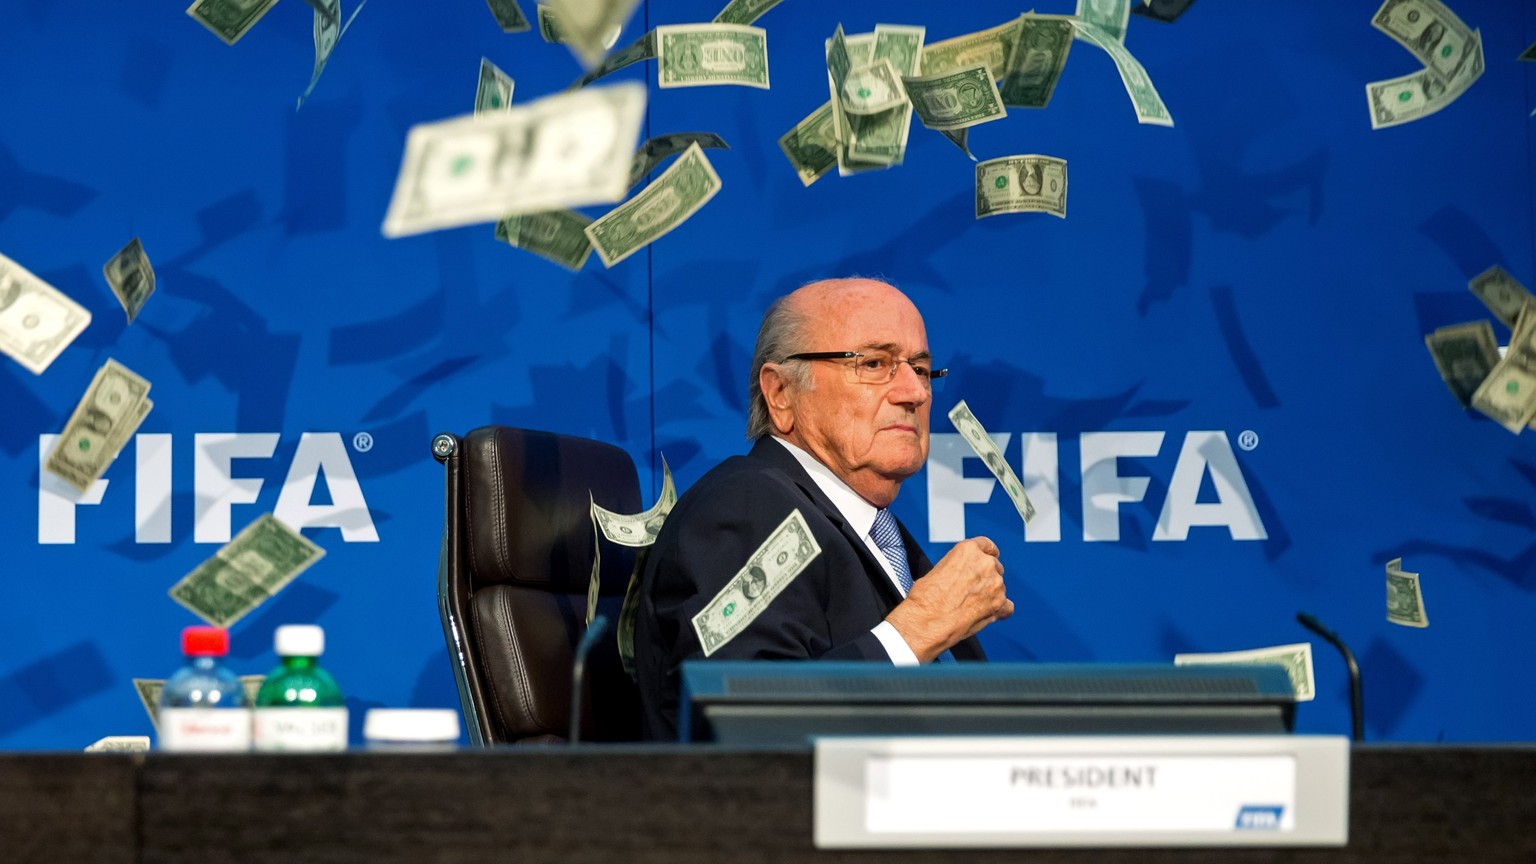 ZURICH, SWITZERLAND - JULY 20: A comedian attacked FIFA President Joseph S. Blatter with money during a press conference at the Extraordinary FIFA Executive Committee Meeting at the FIFA headquarters  ...